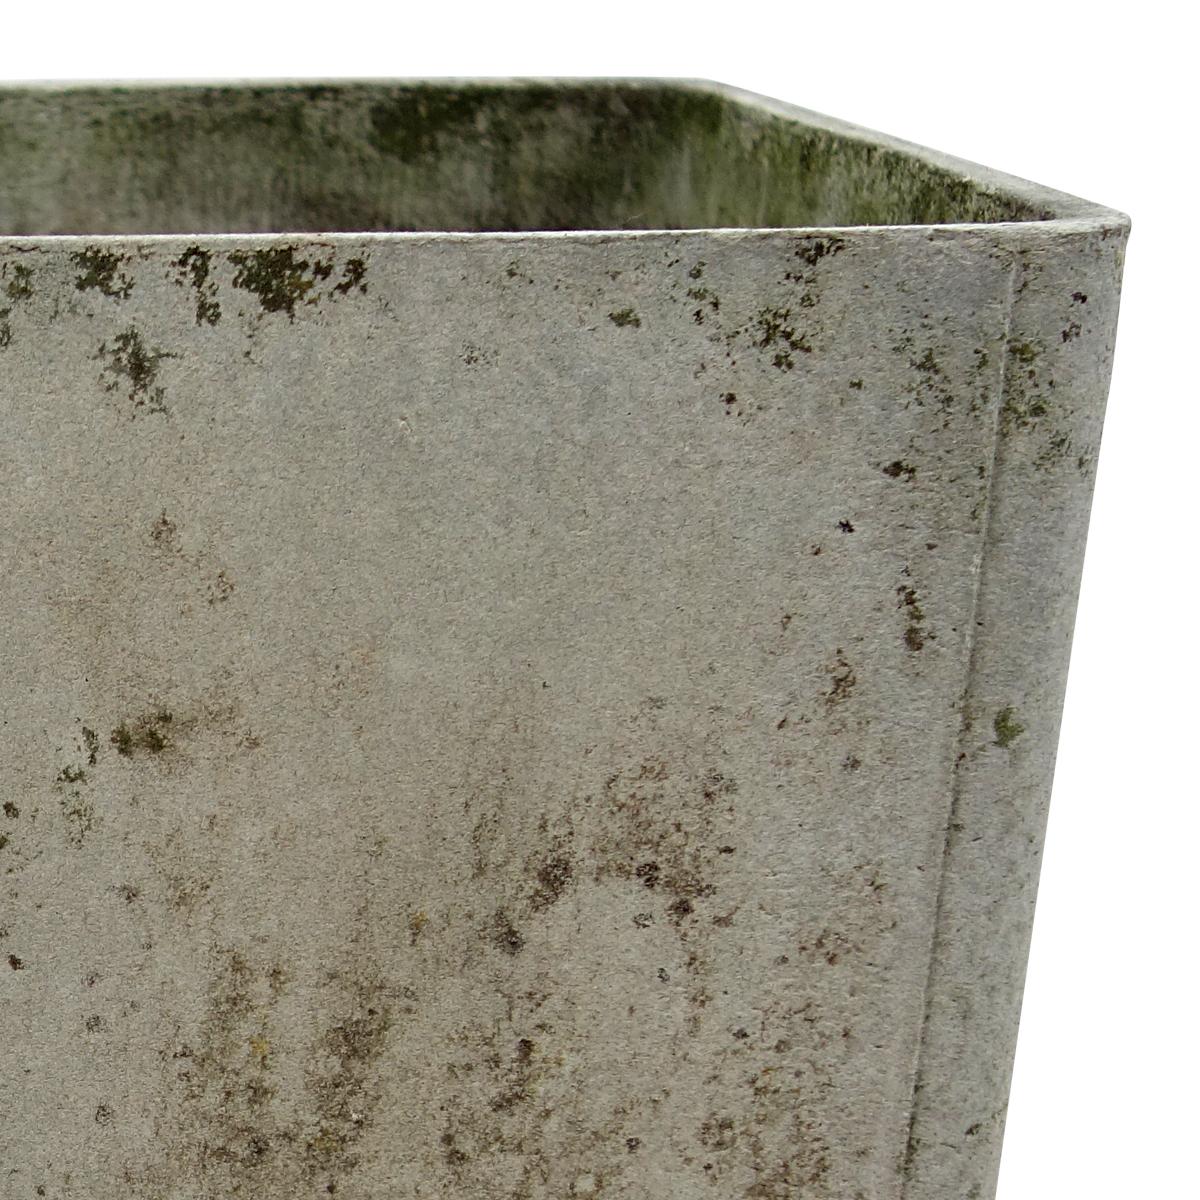 Large square planter by Swiss architect Willy Guhl for Eternit.
The planter is made of moulded cement.
Good vintage condition with nice patina.